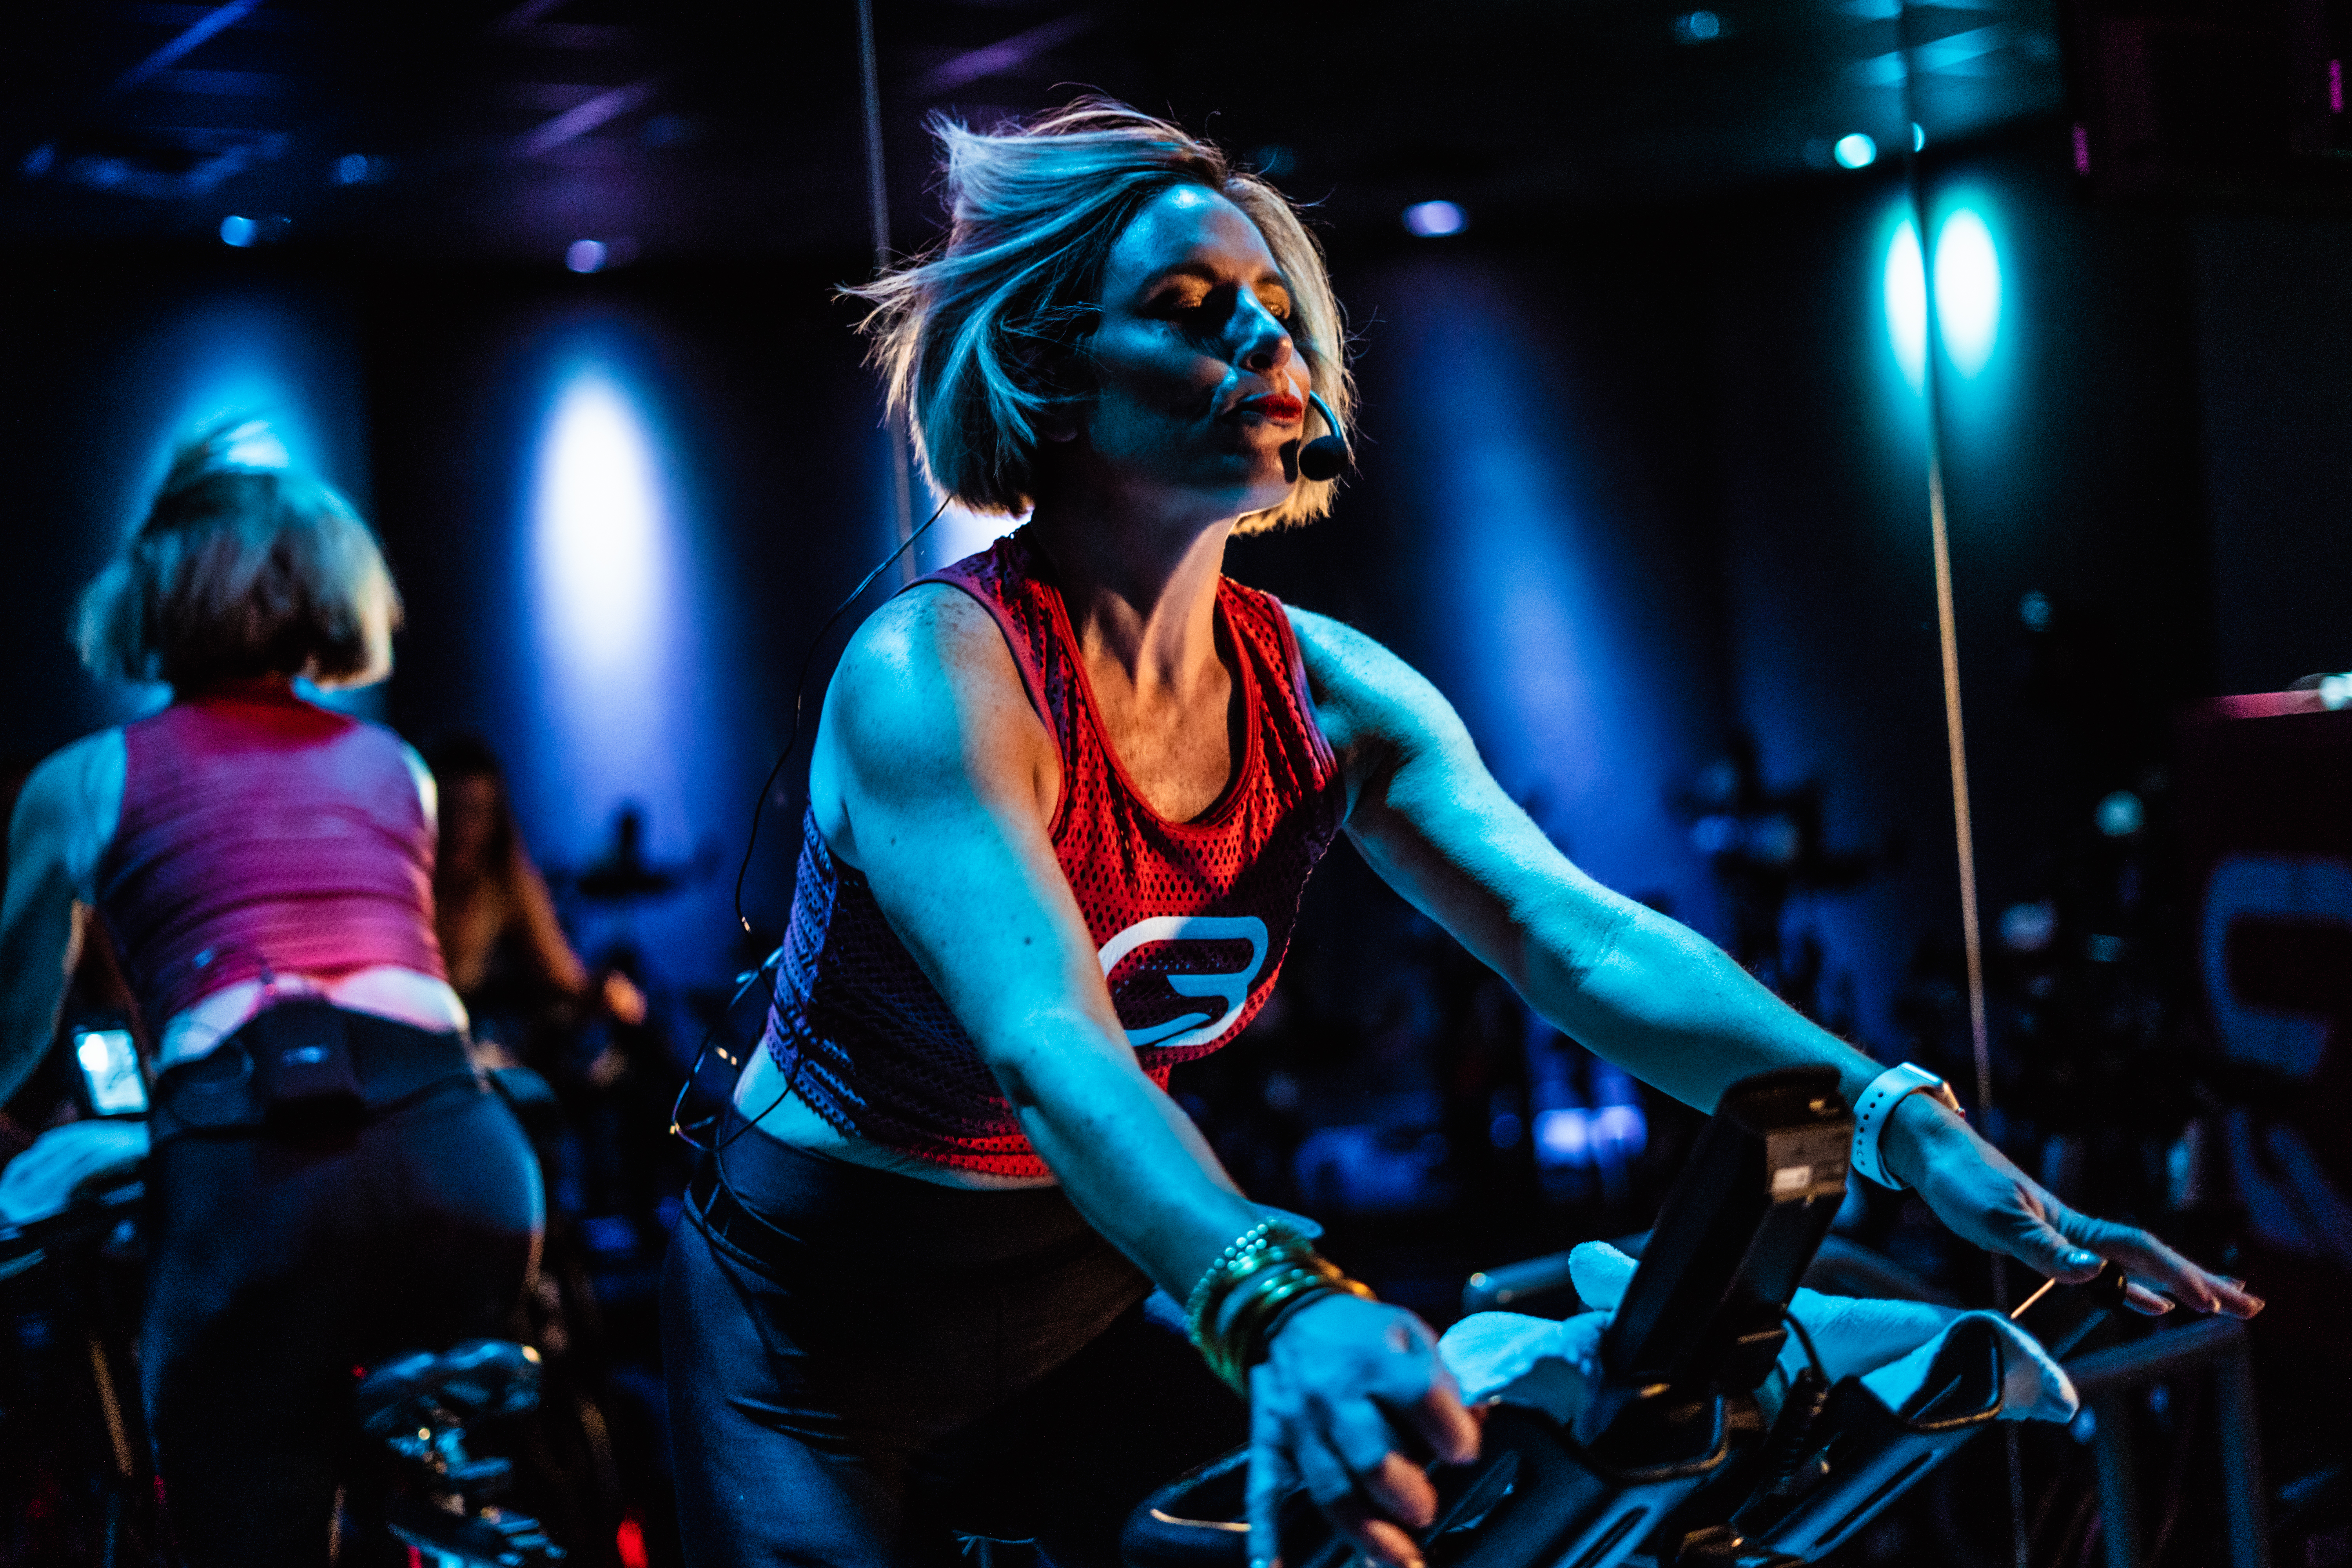 Want to know <span>the differences between stationary bike and treadmill workouts? Check out this Bustle article now! </span>